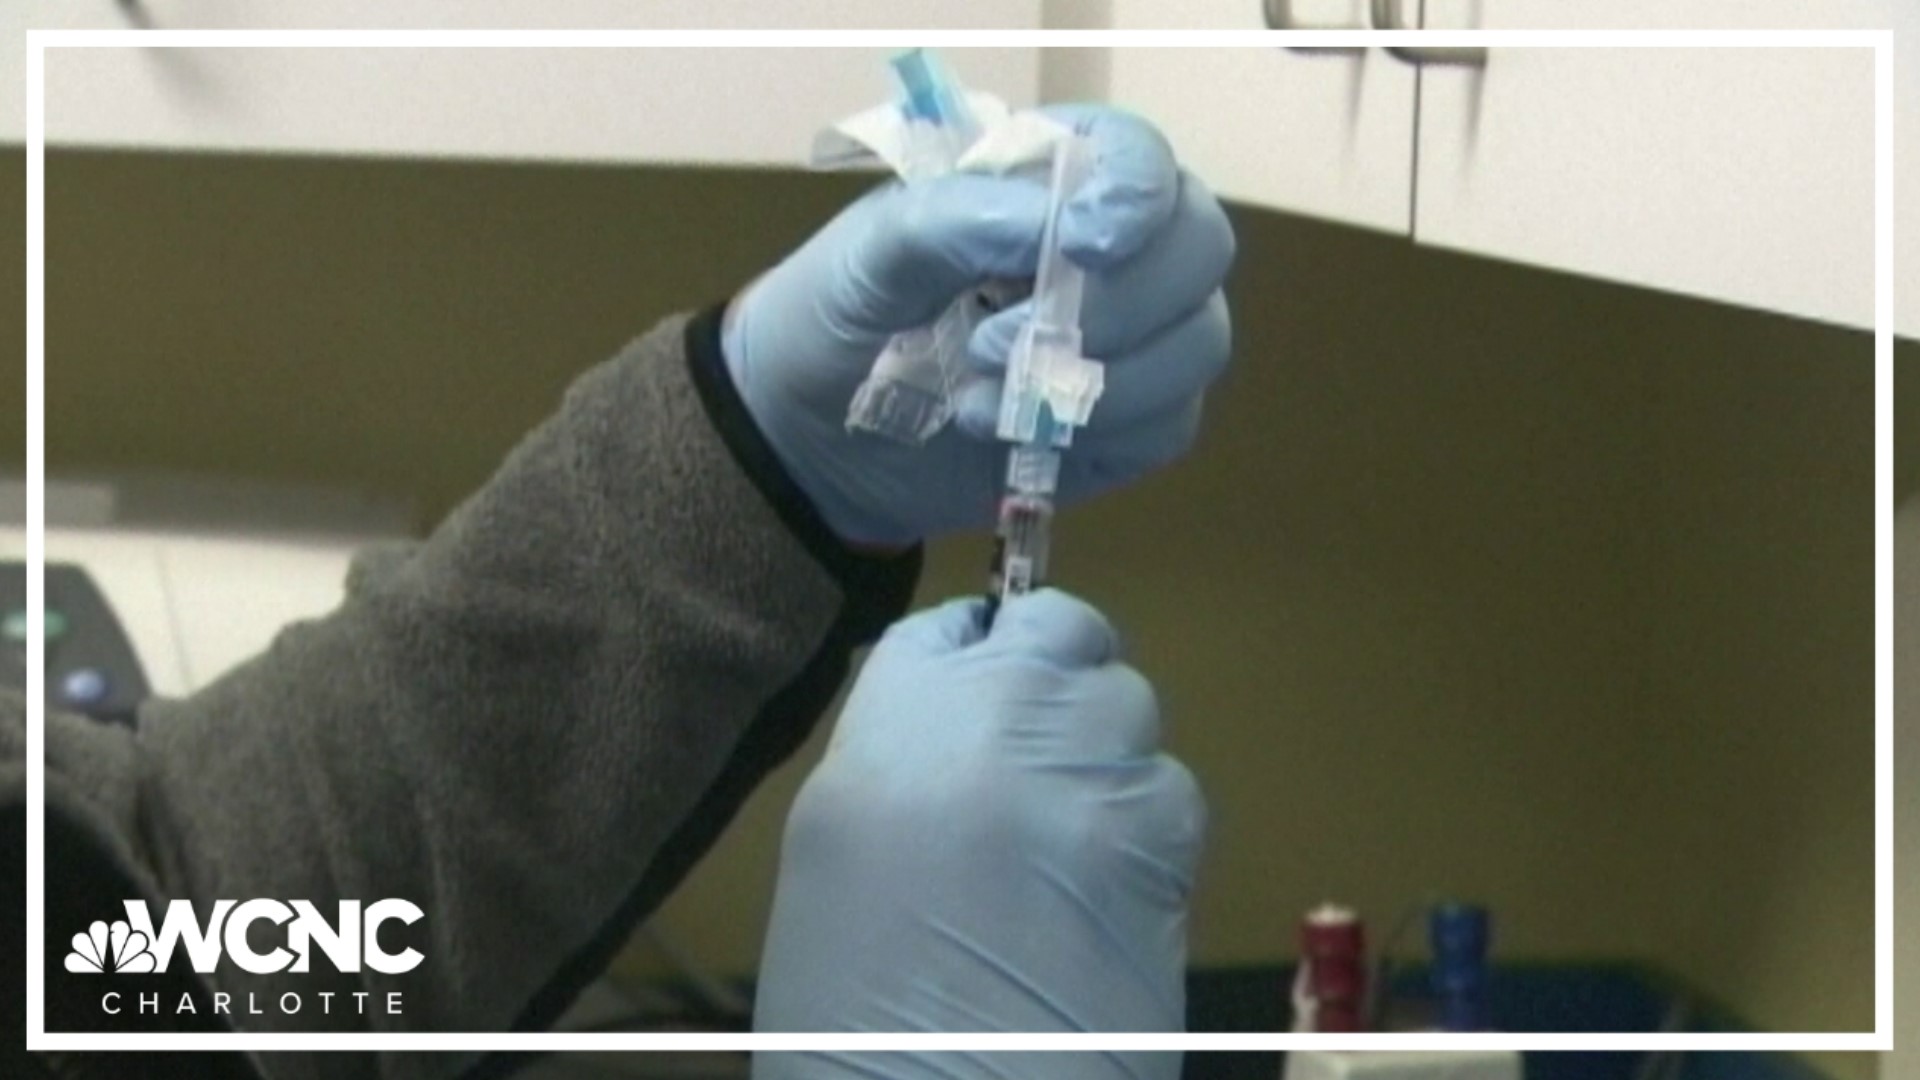 Most Americans should get an updated COVID-19 vaccine, health officials said Tuesday.